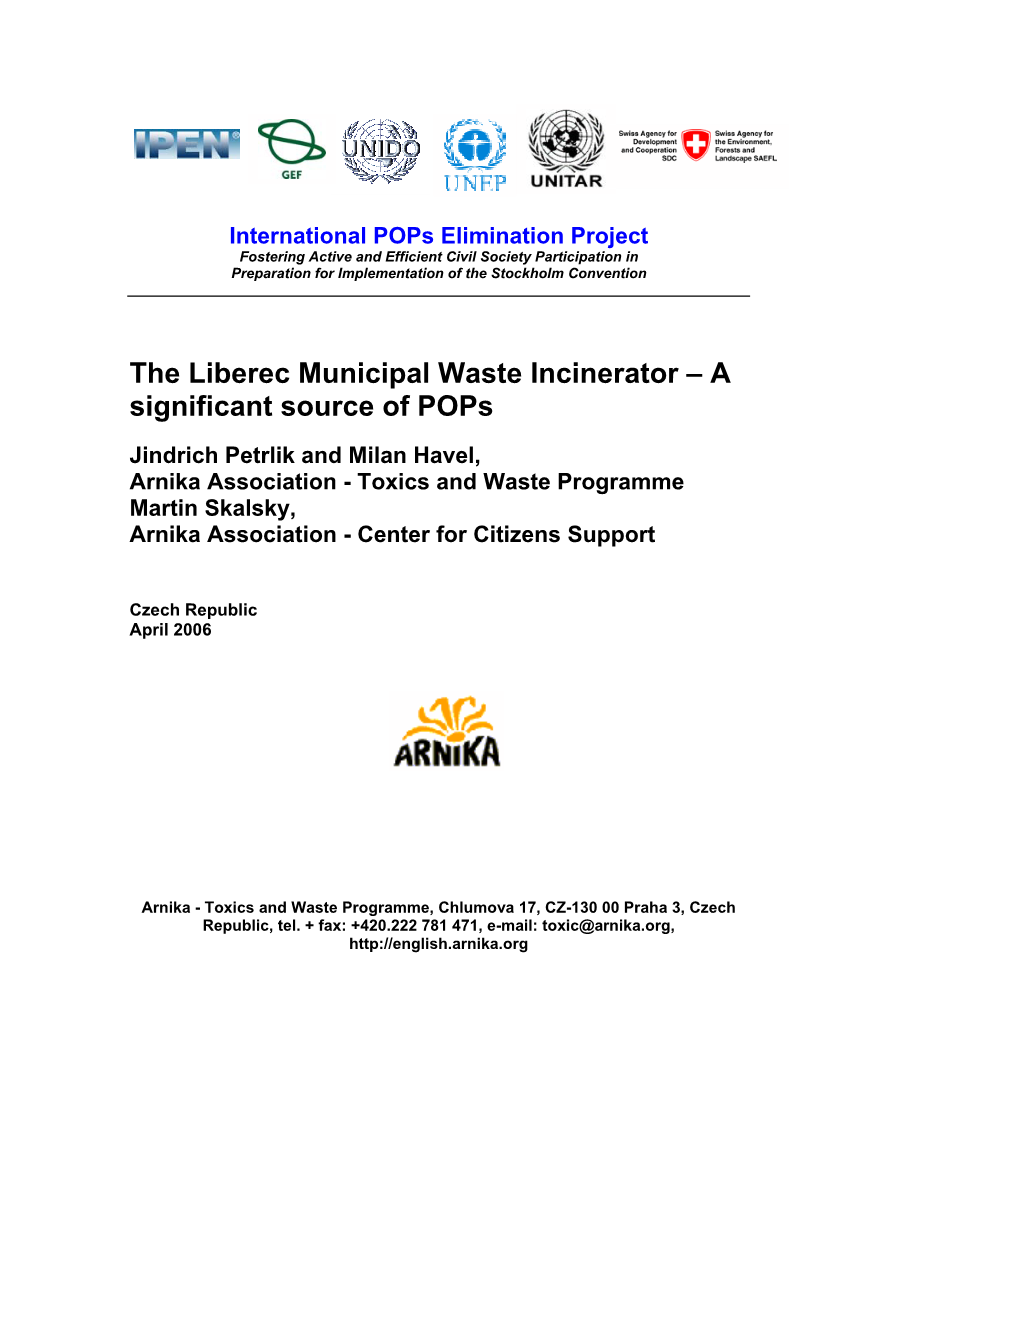 The Liberec Municipal Waste Incinerator – a Significant Source of Pops